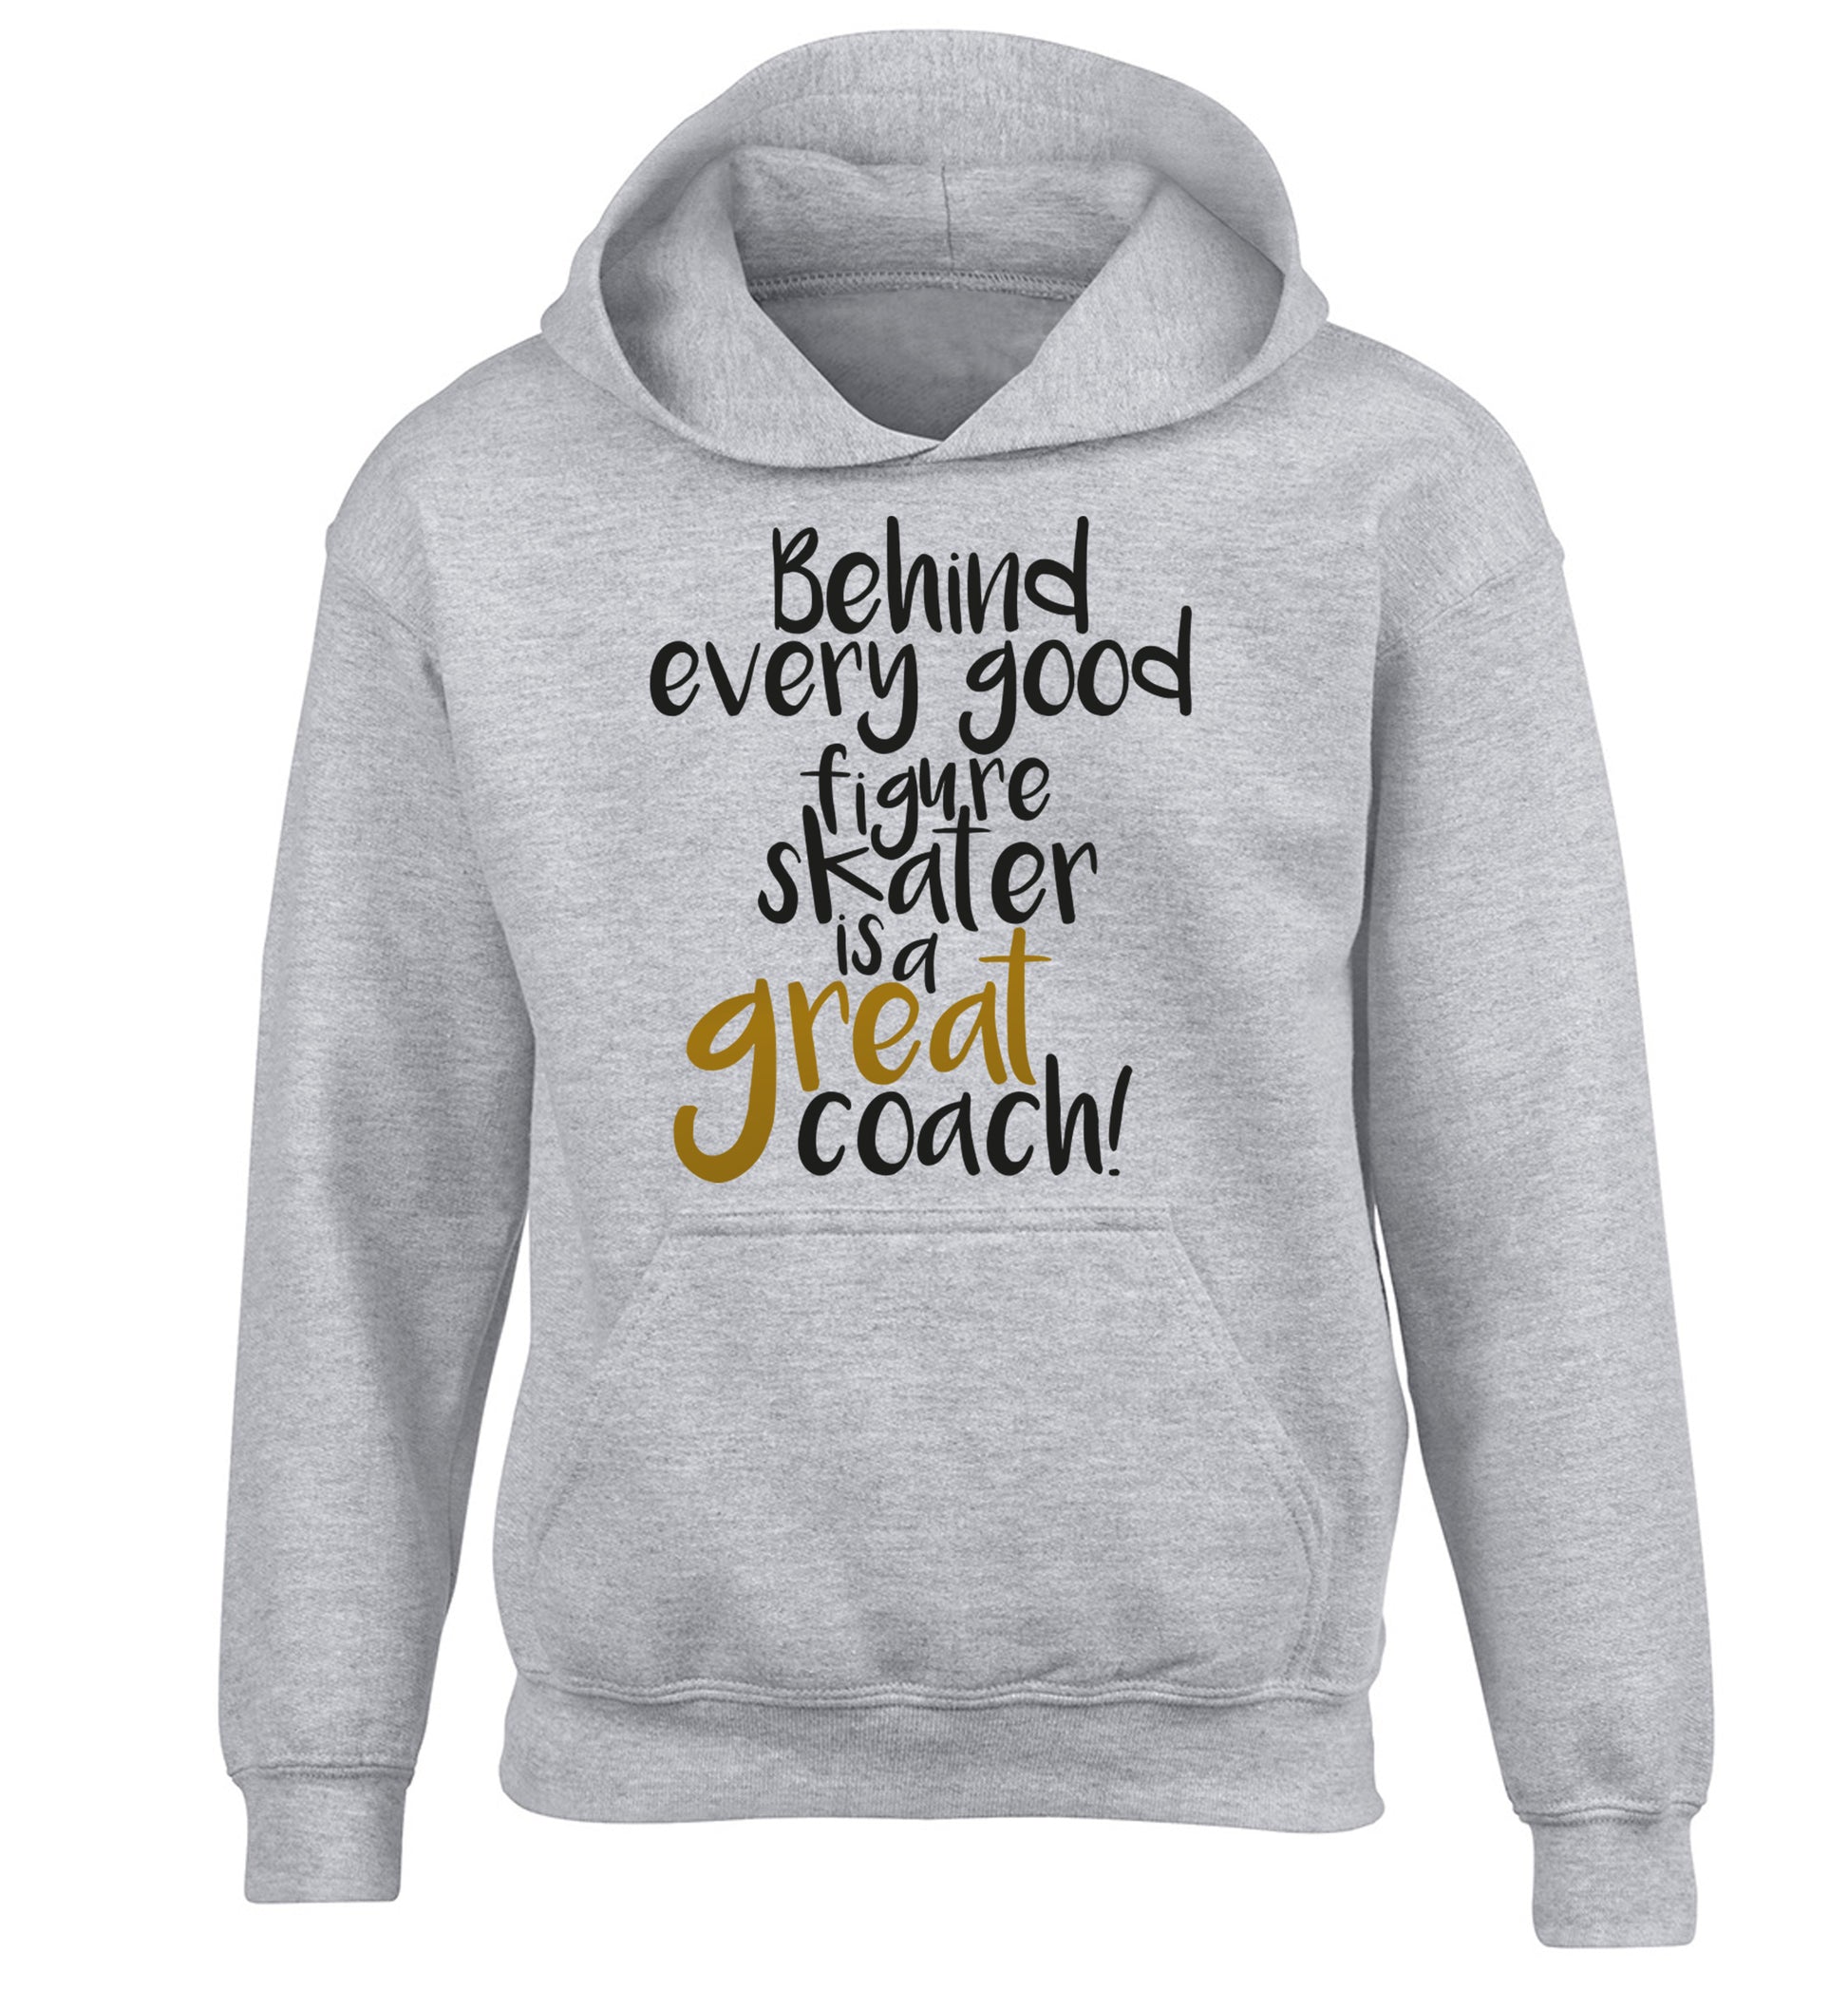 Behind every good figure skater is a great coach children's grey hoodie 12-14 Years